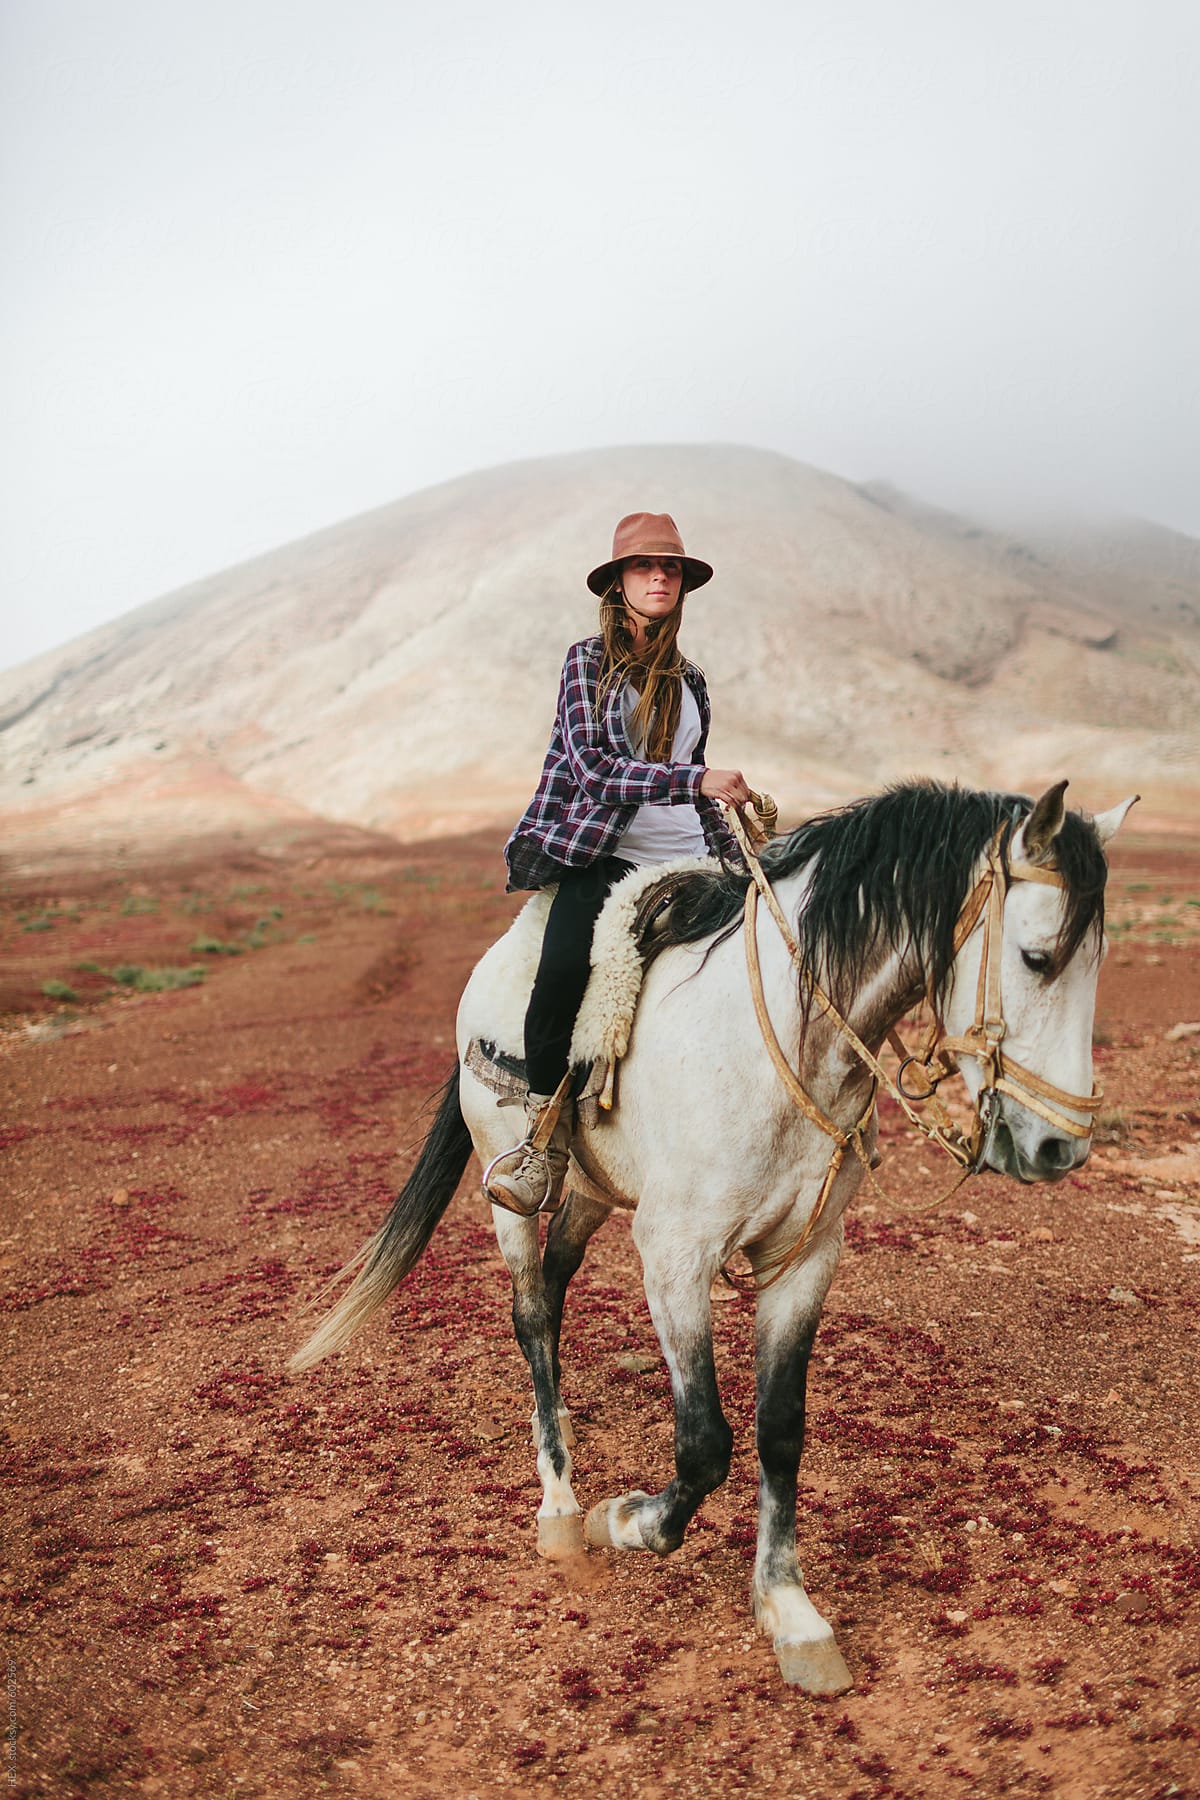 Woman Riding a White Horse in the Middle of a Desert Area